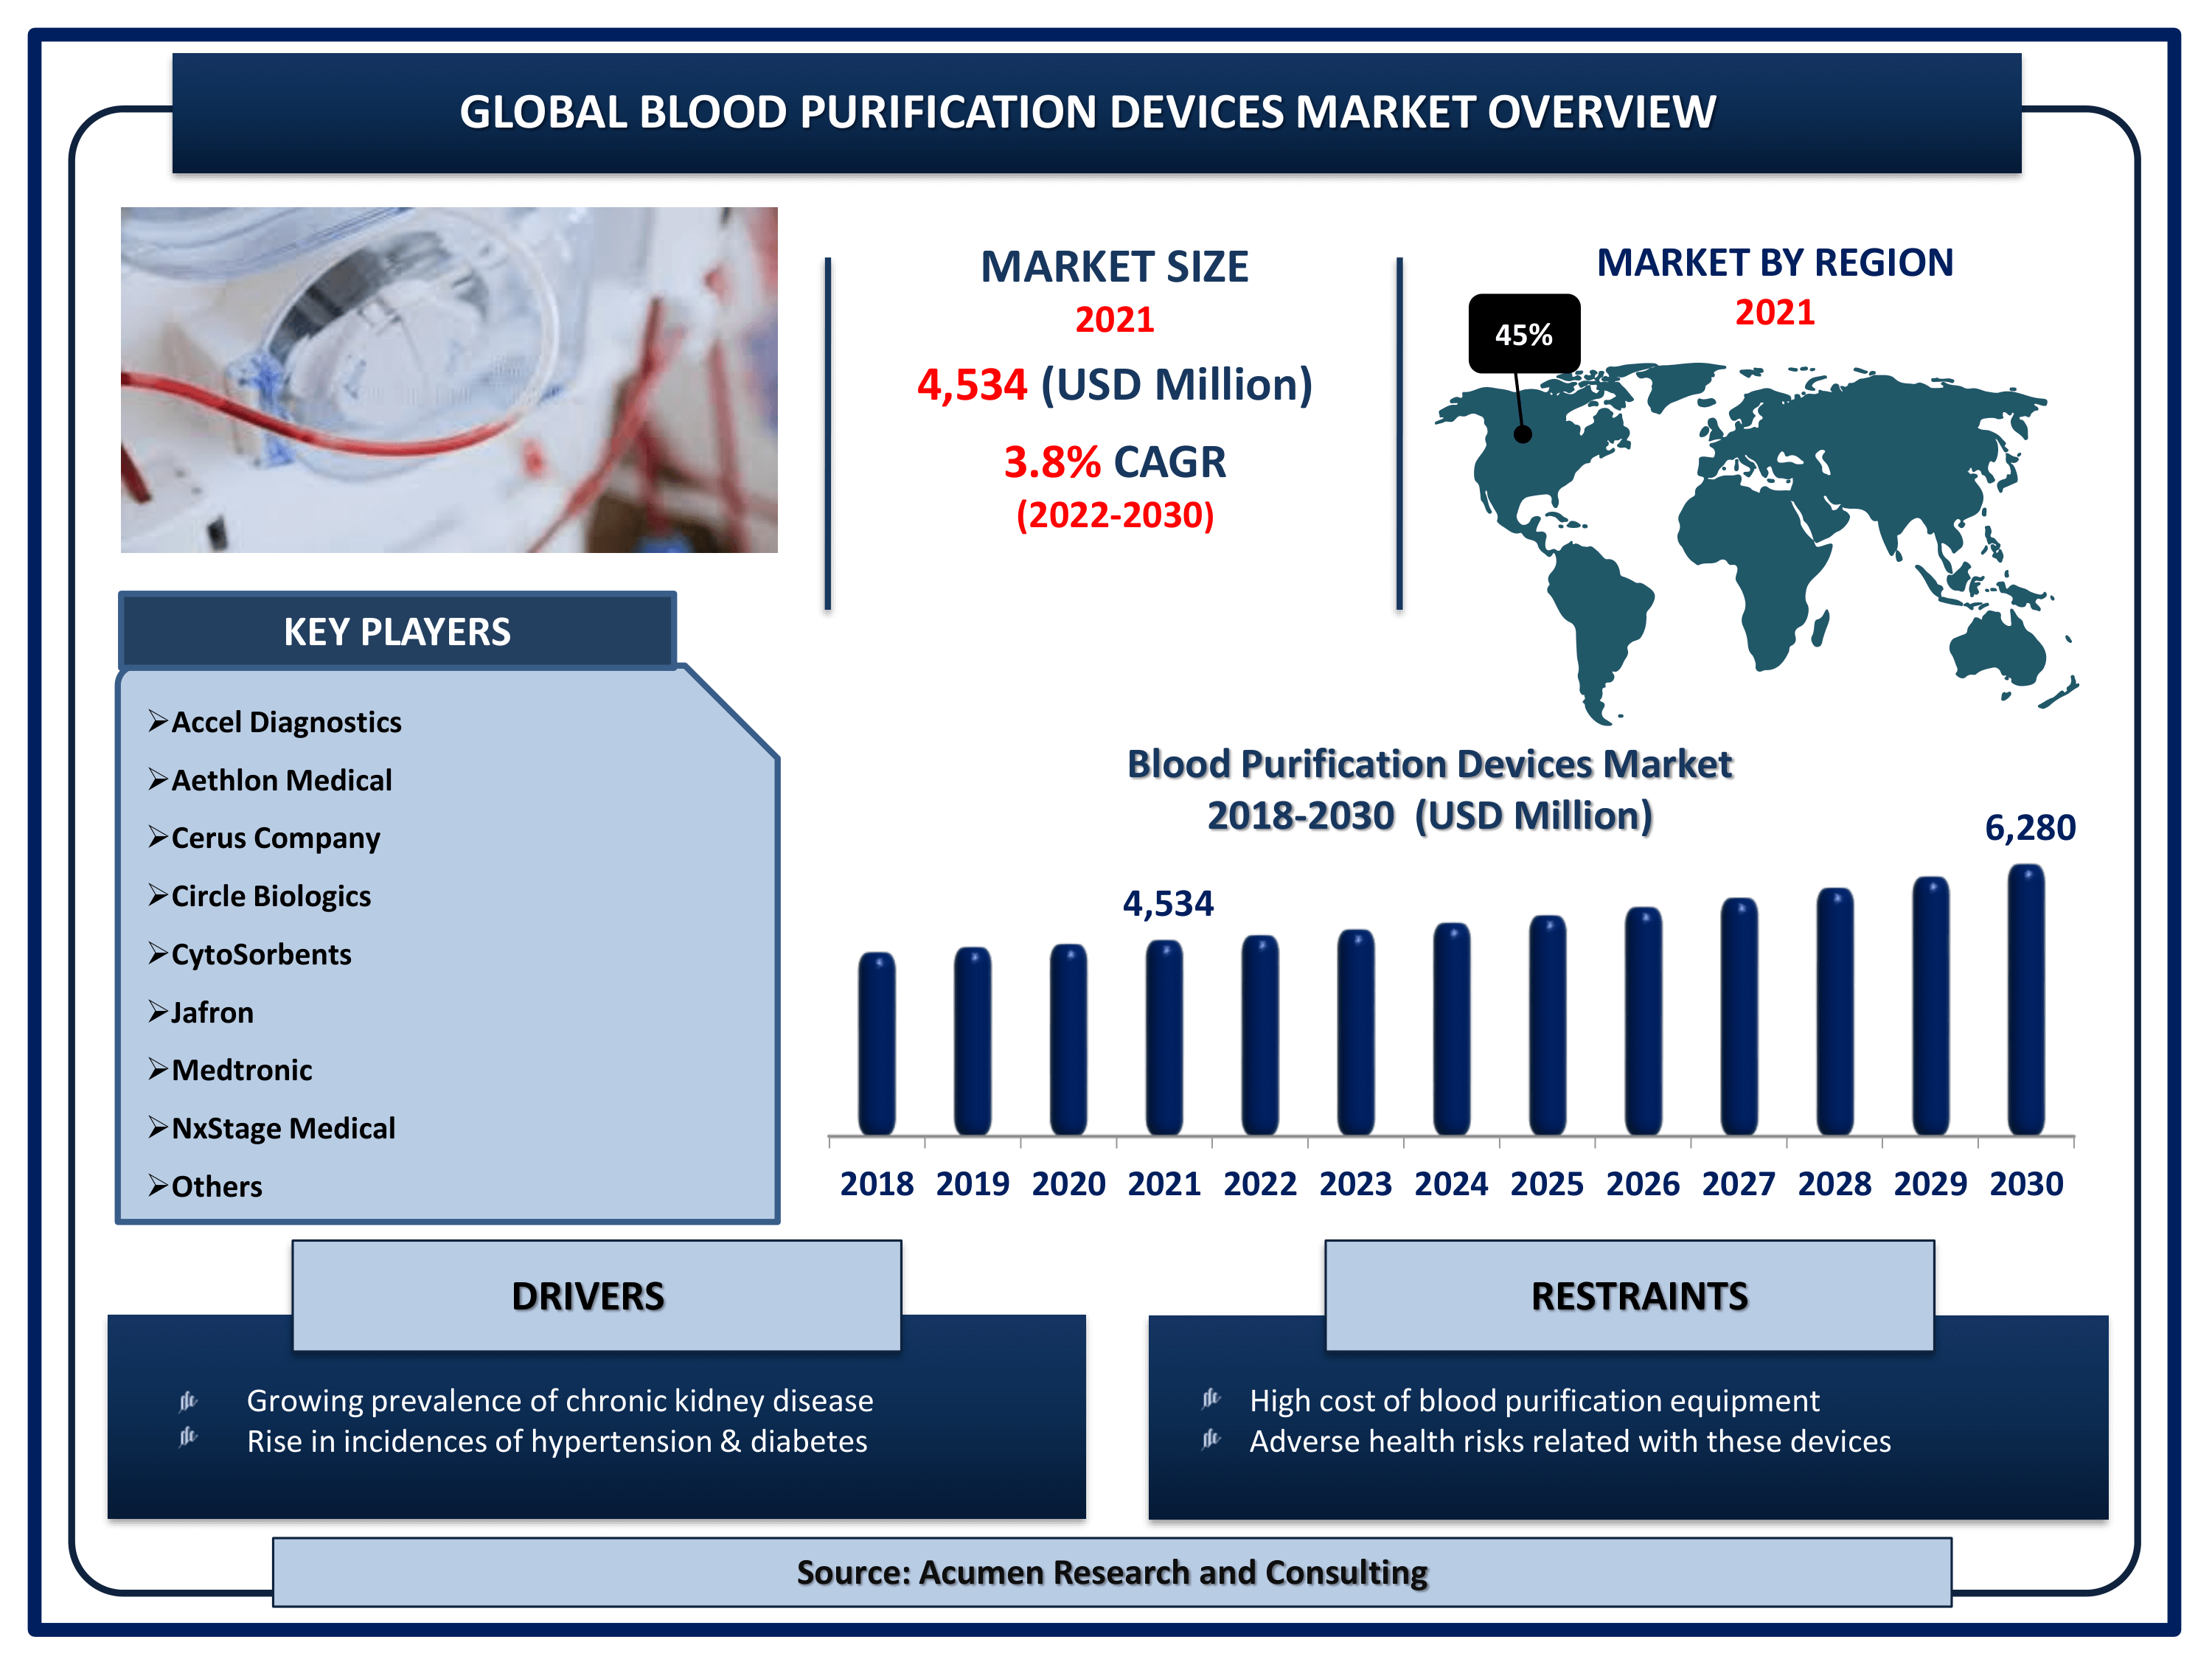 Global blood purification devices market revenue is estimated to reach USD 6,280 Million by 2030 with a CAGR of 3.8% from 2022 to 2030